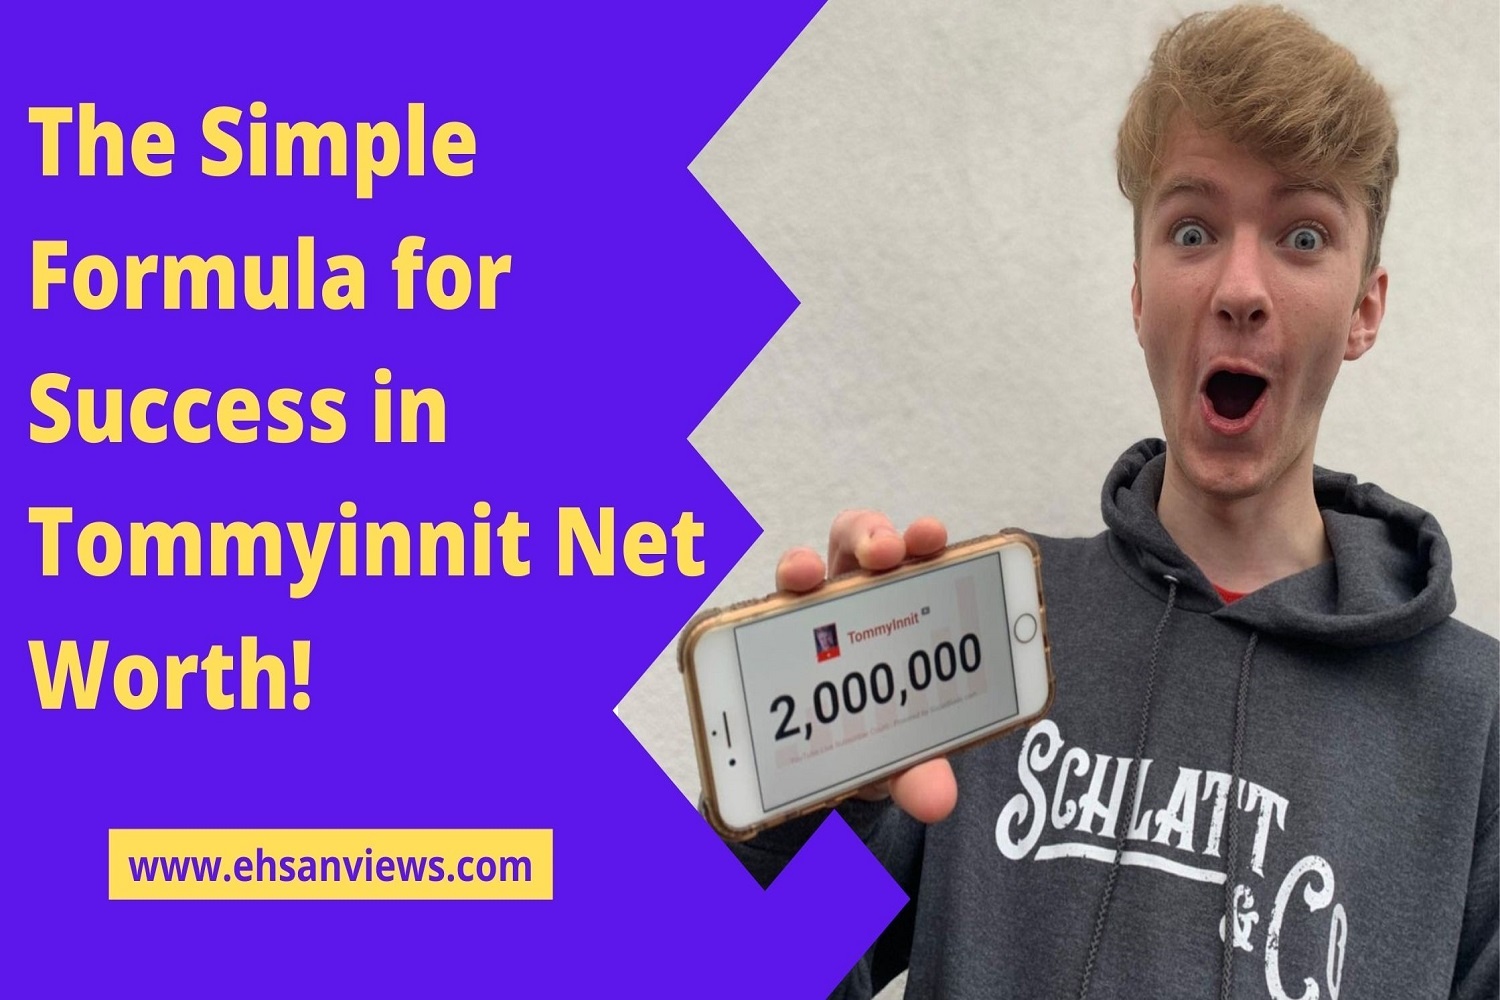 The Simple Formula for Success in Tommyinnit Net Worth | Abdul Ehsan | Entrepreneur and Digital Marketing Consultant in Sri Lanka